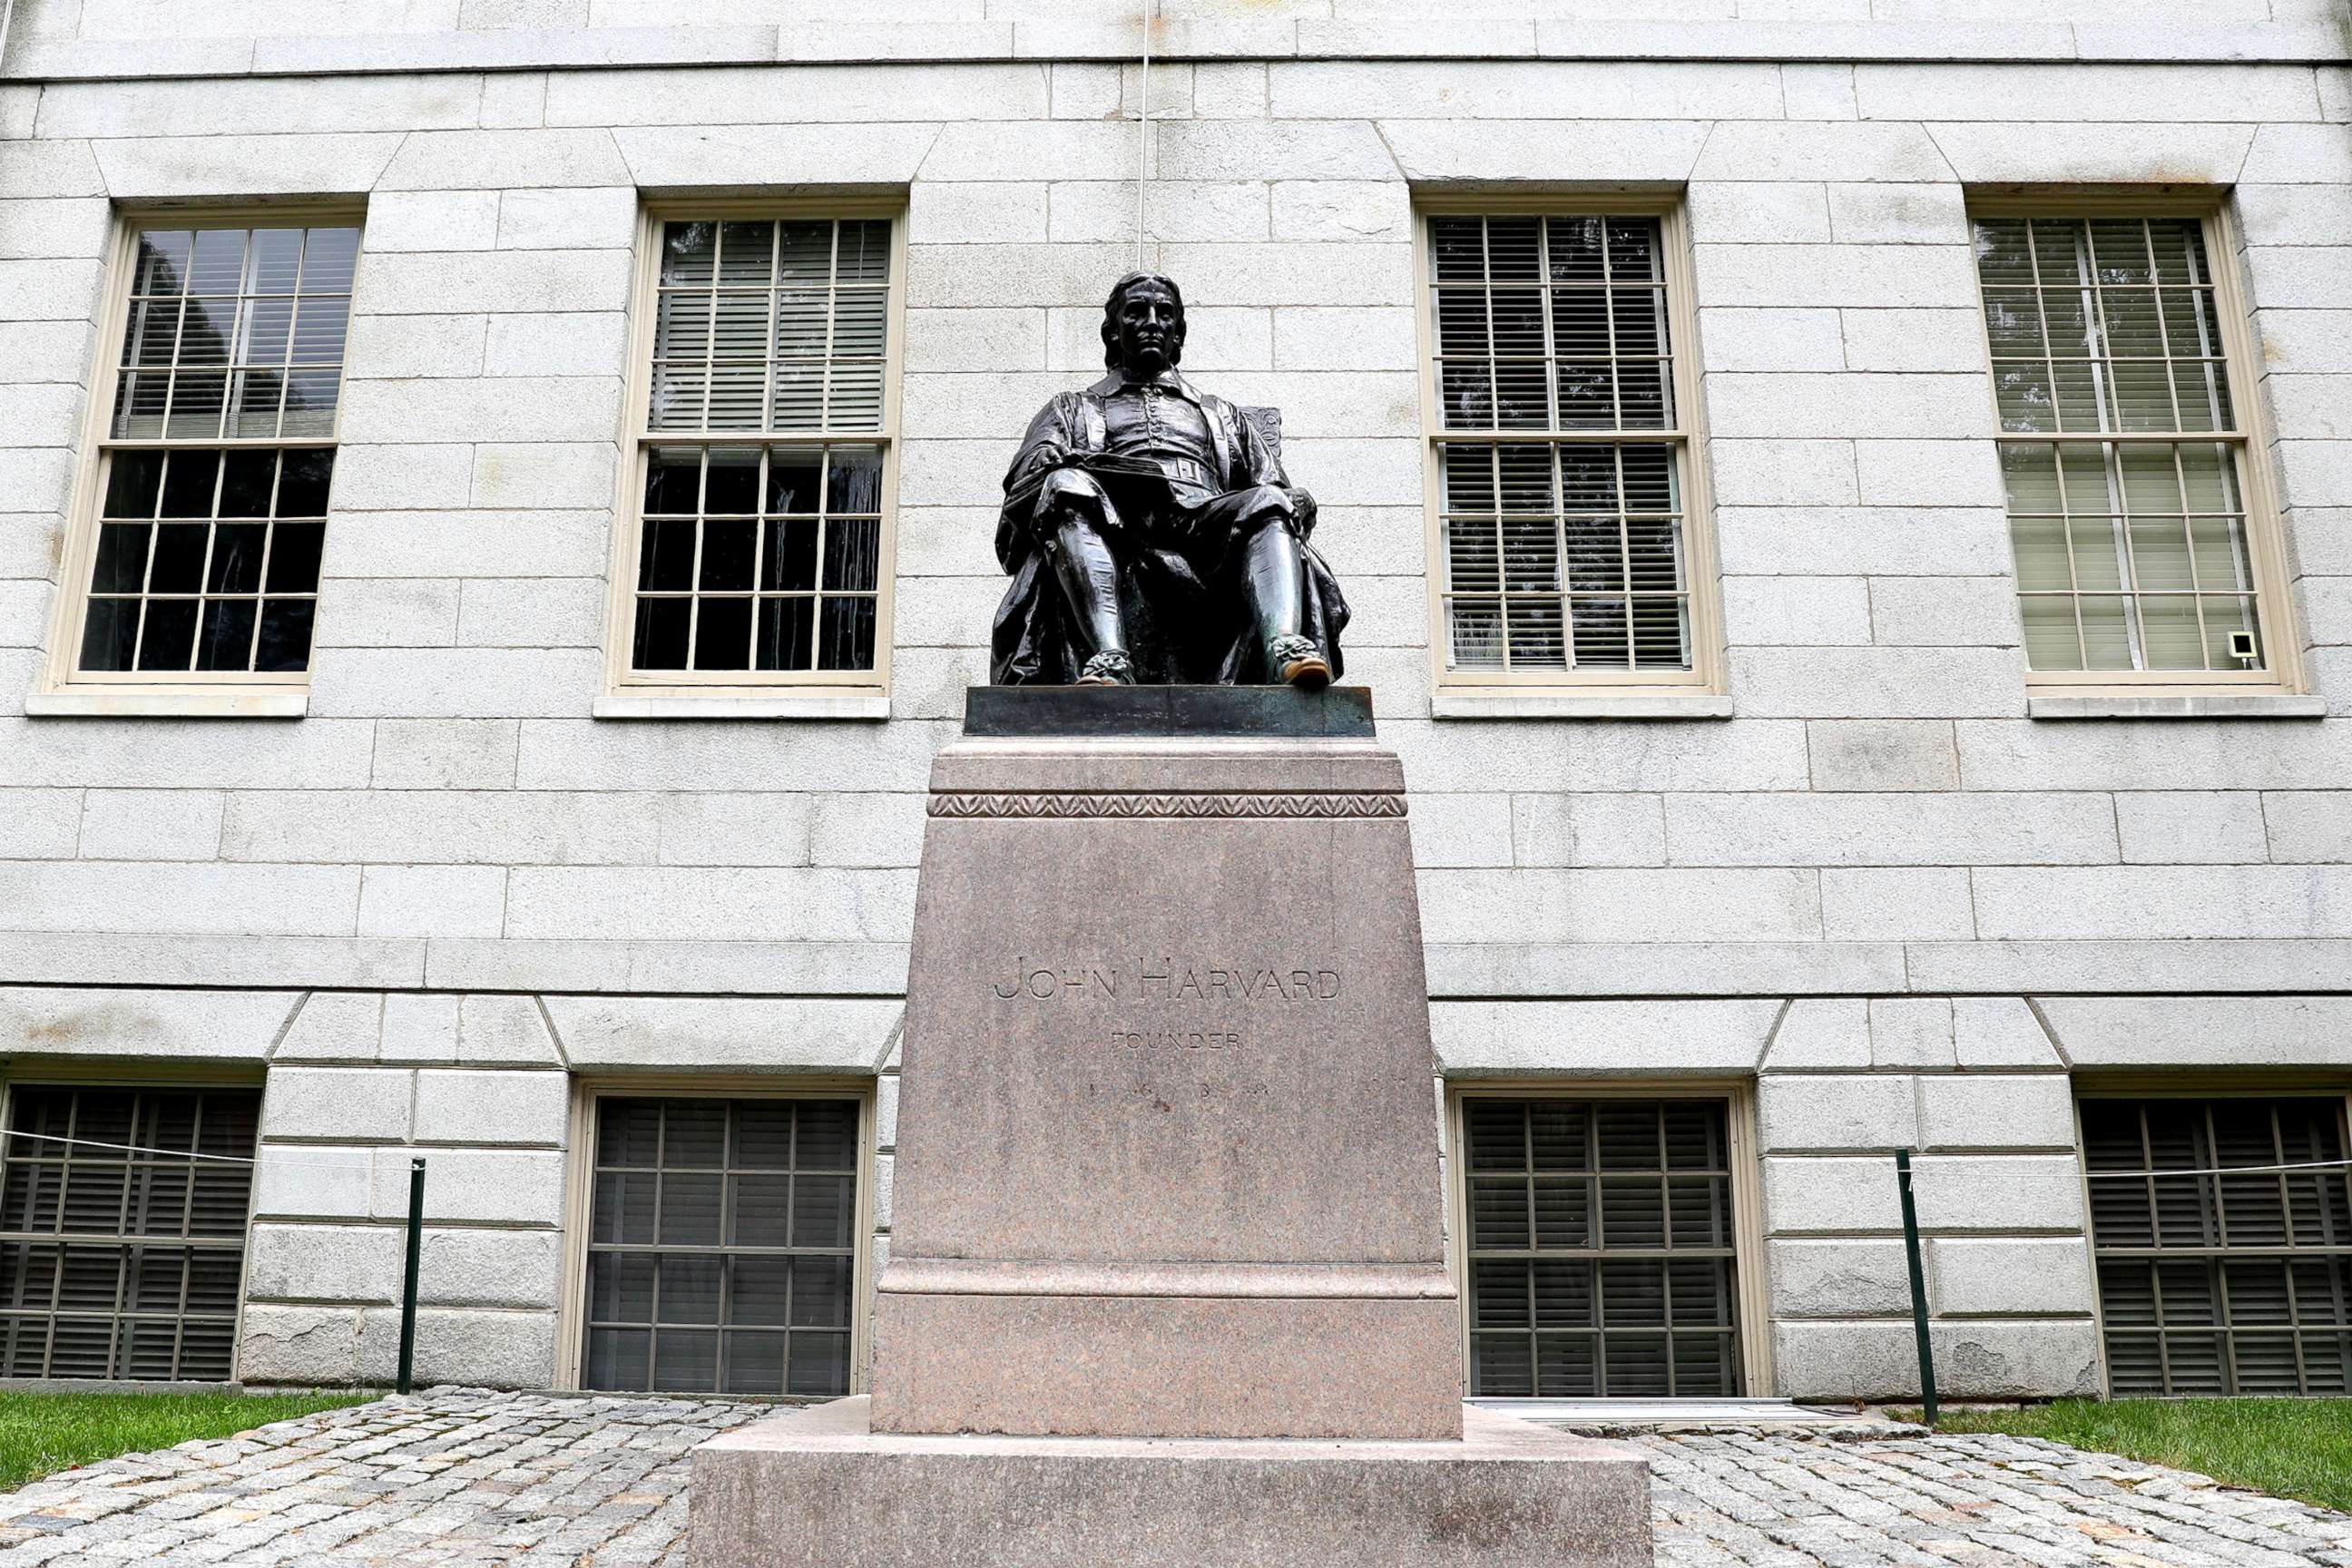 PHOTO: A view of the statue of John Harvard on the campus of Harvard University, July 8, 2020, in Cambridge, Mass.